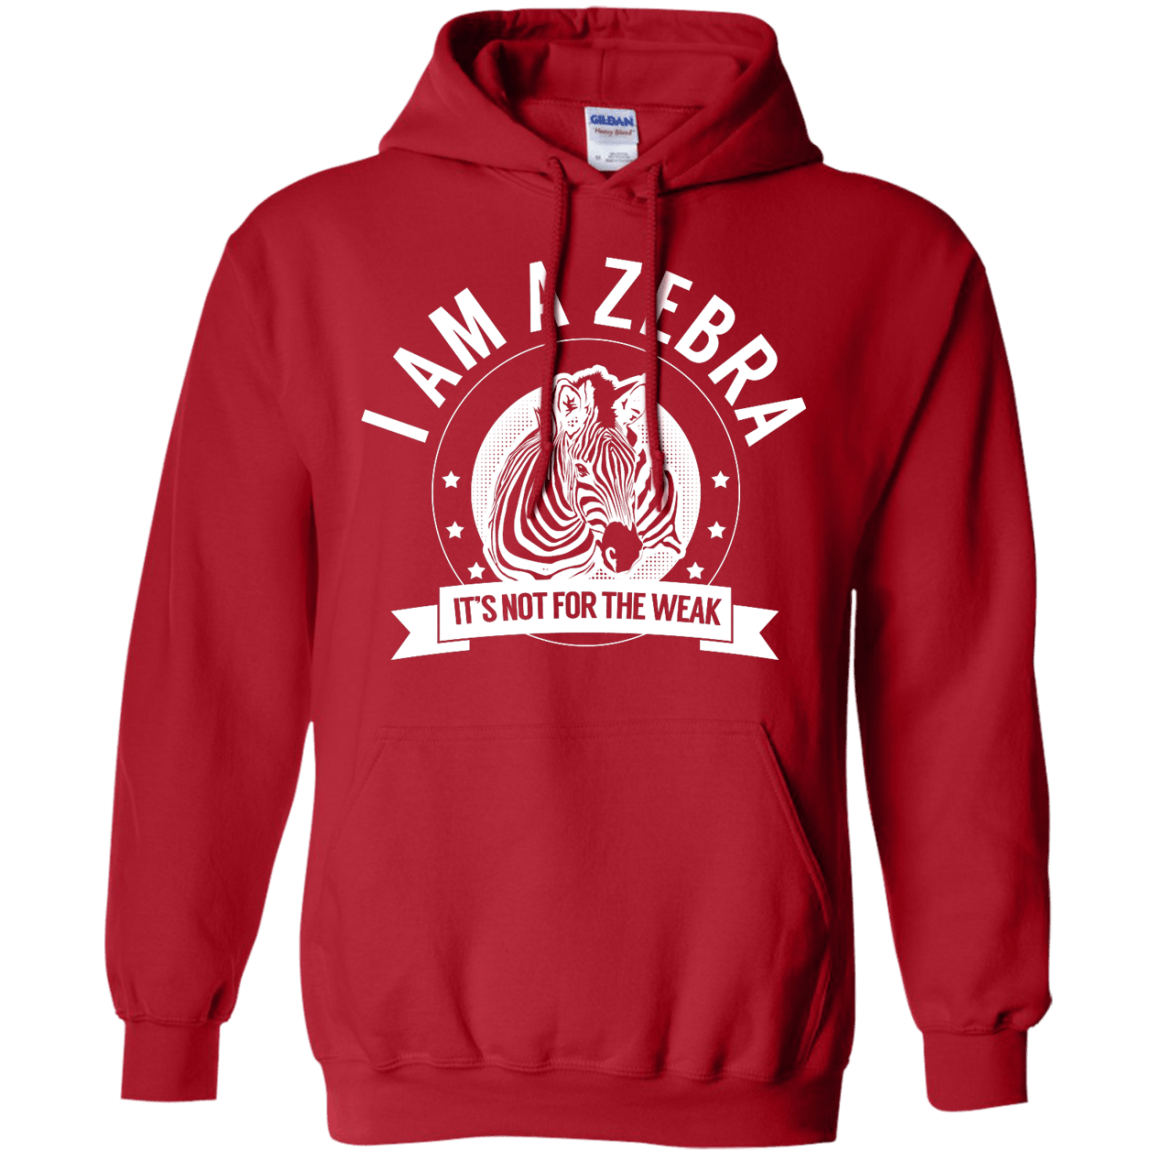 Zebra Warrior Not for the Weak Pullover Hoodie 8 oz - The Unchargeables